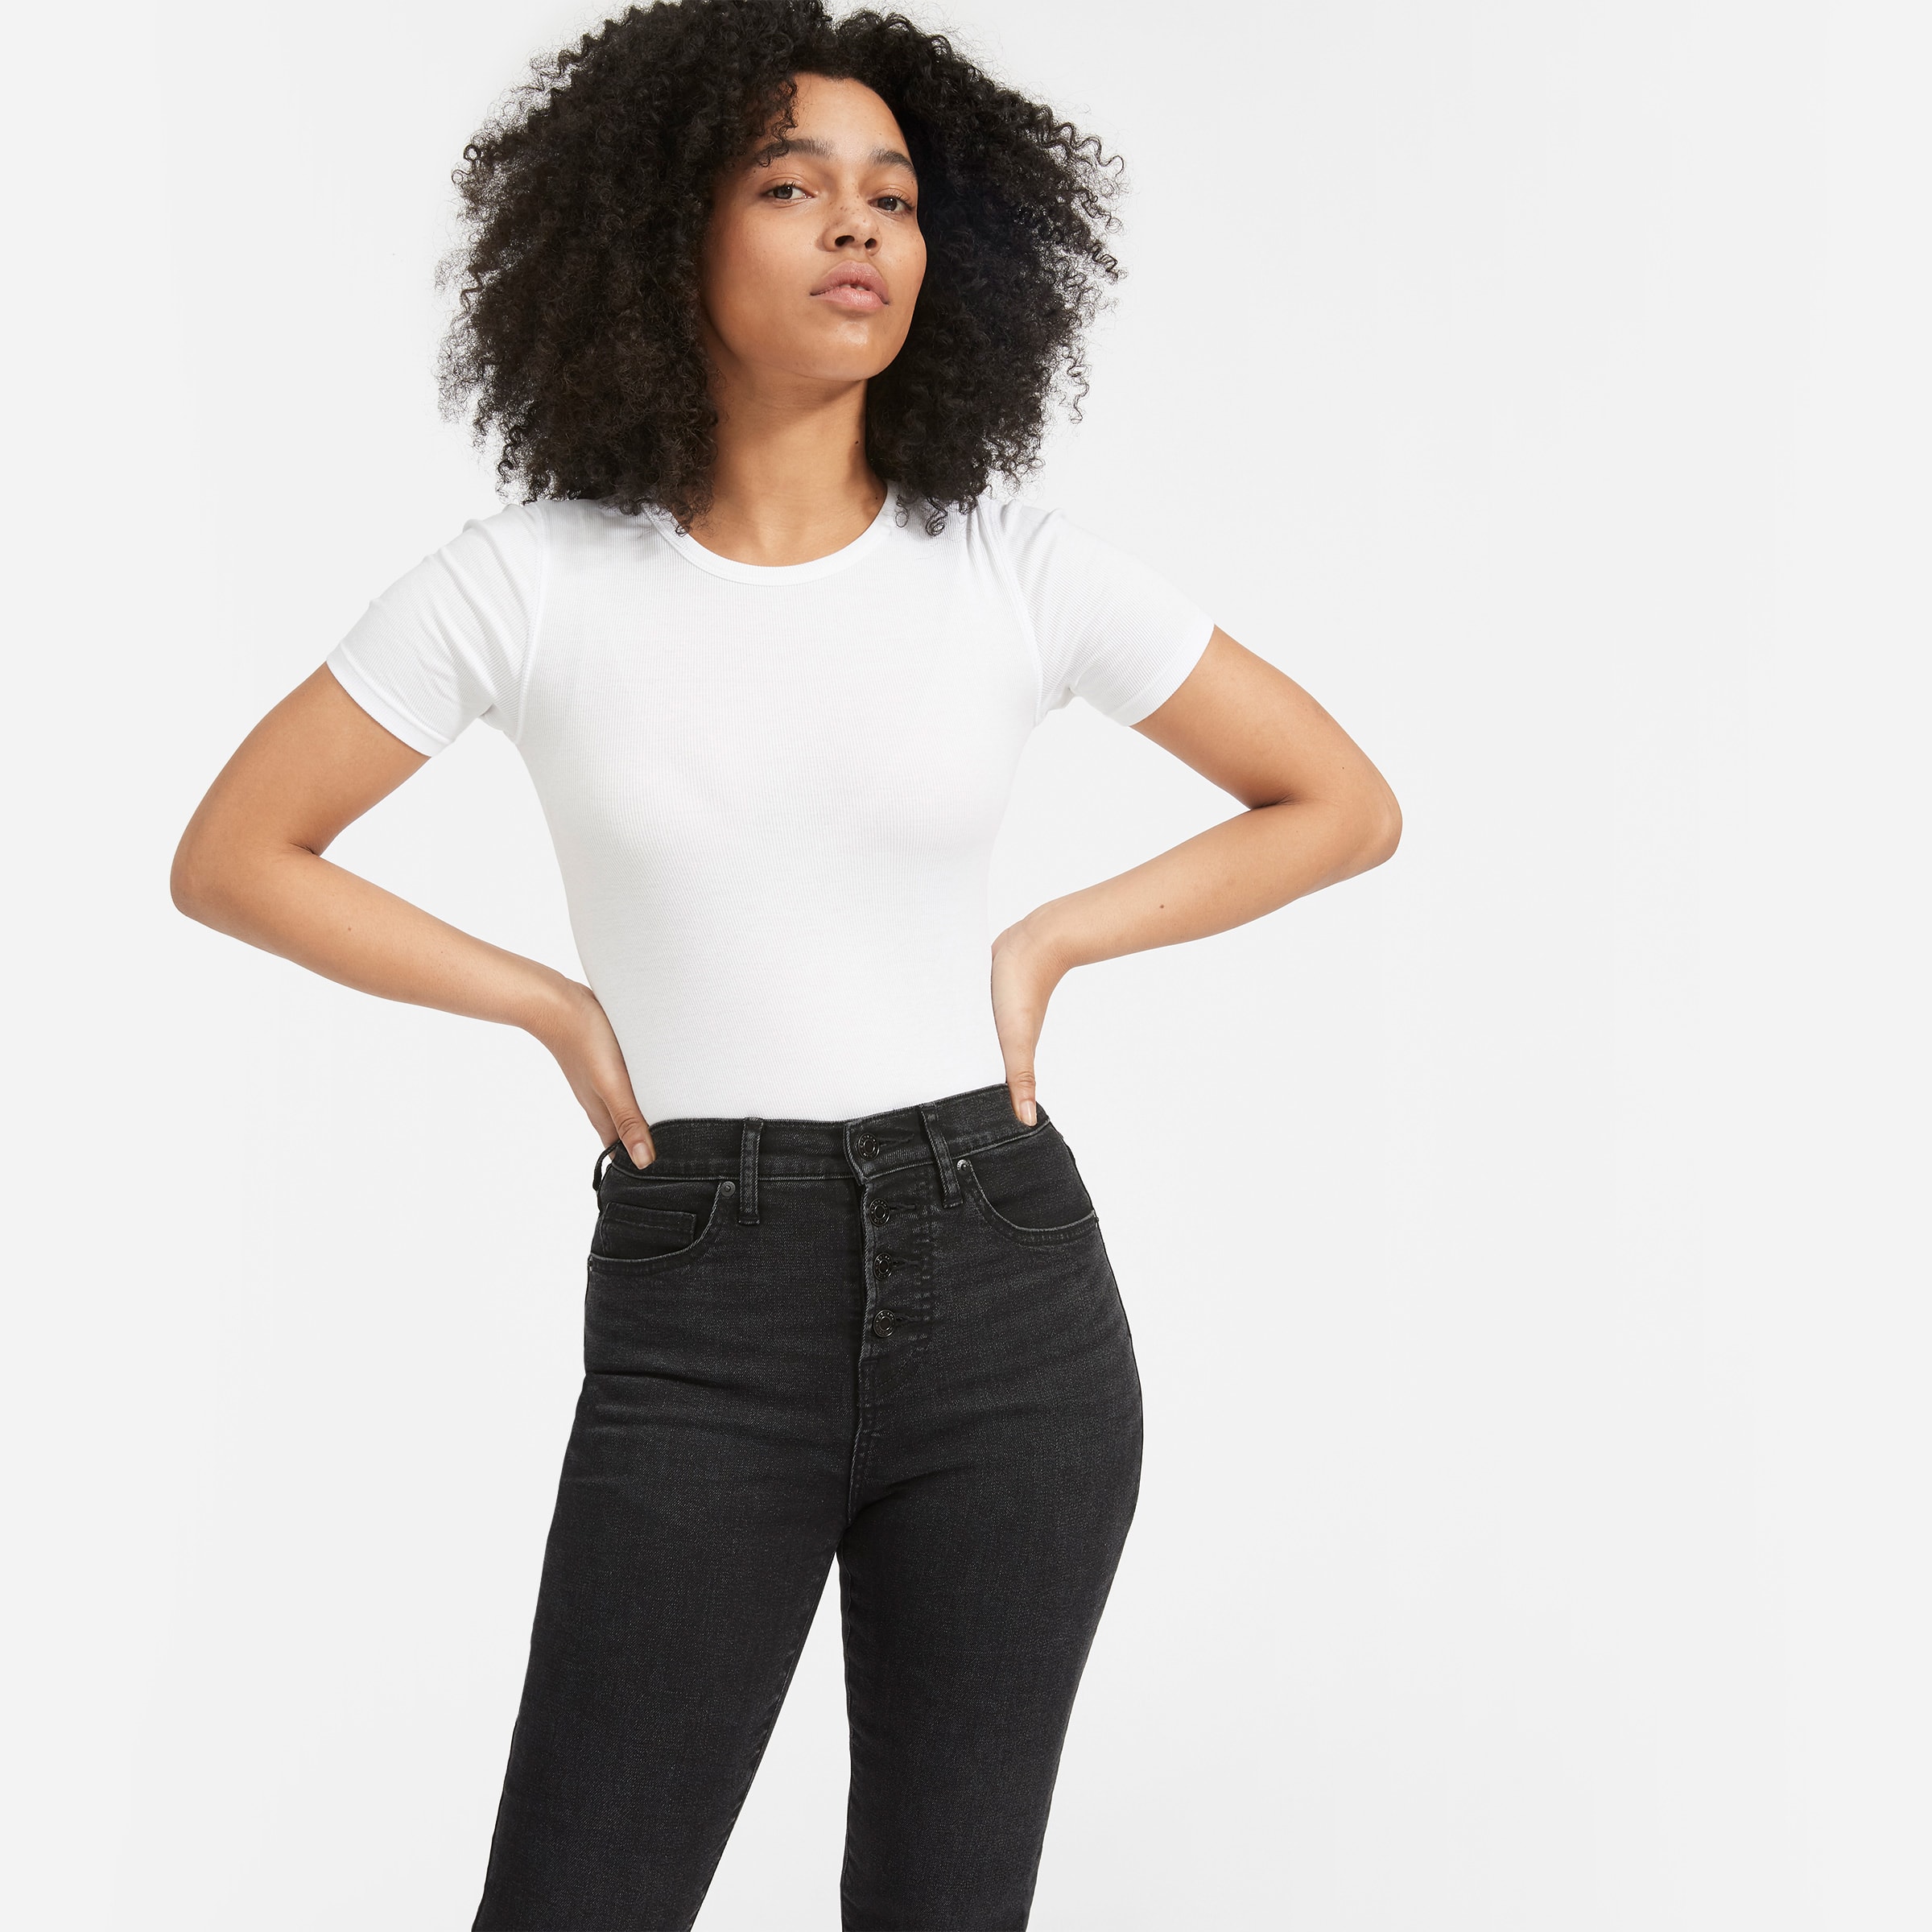 everlane button fly